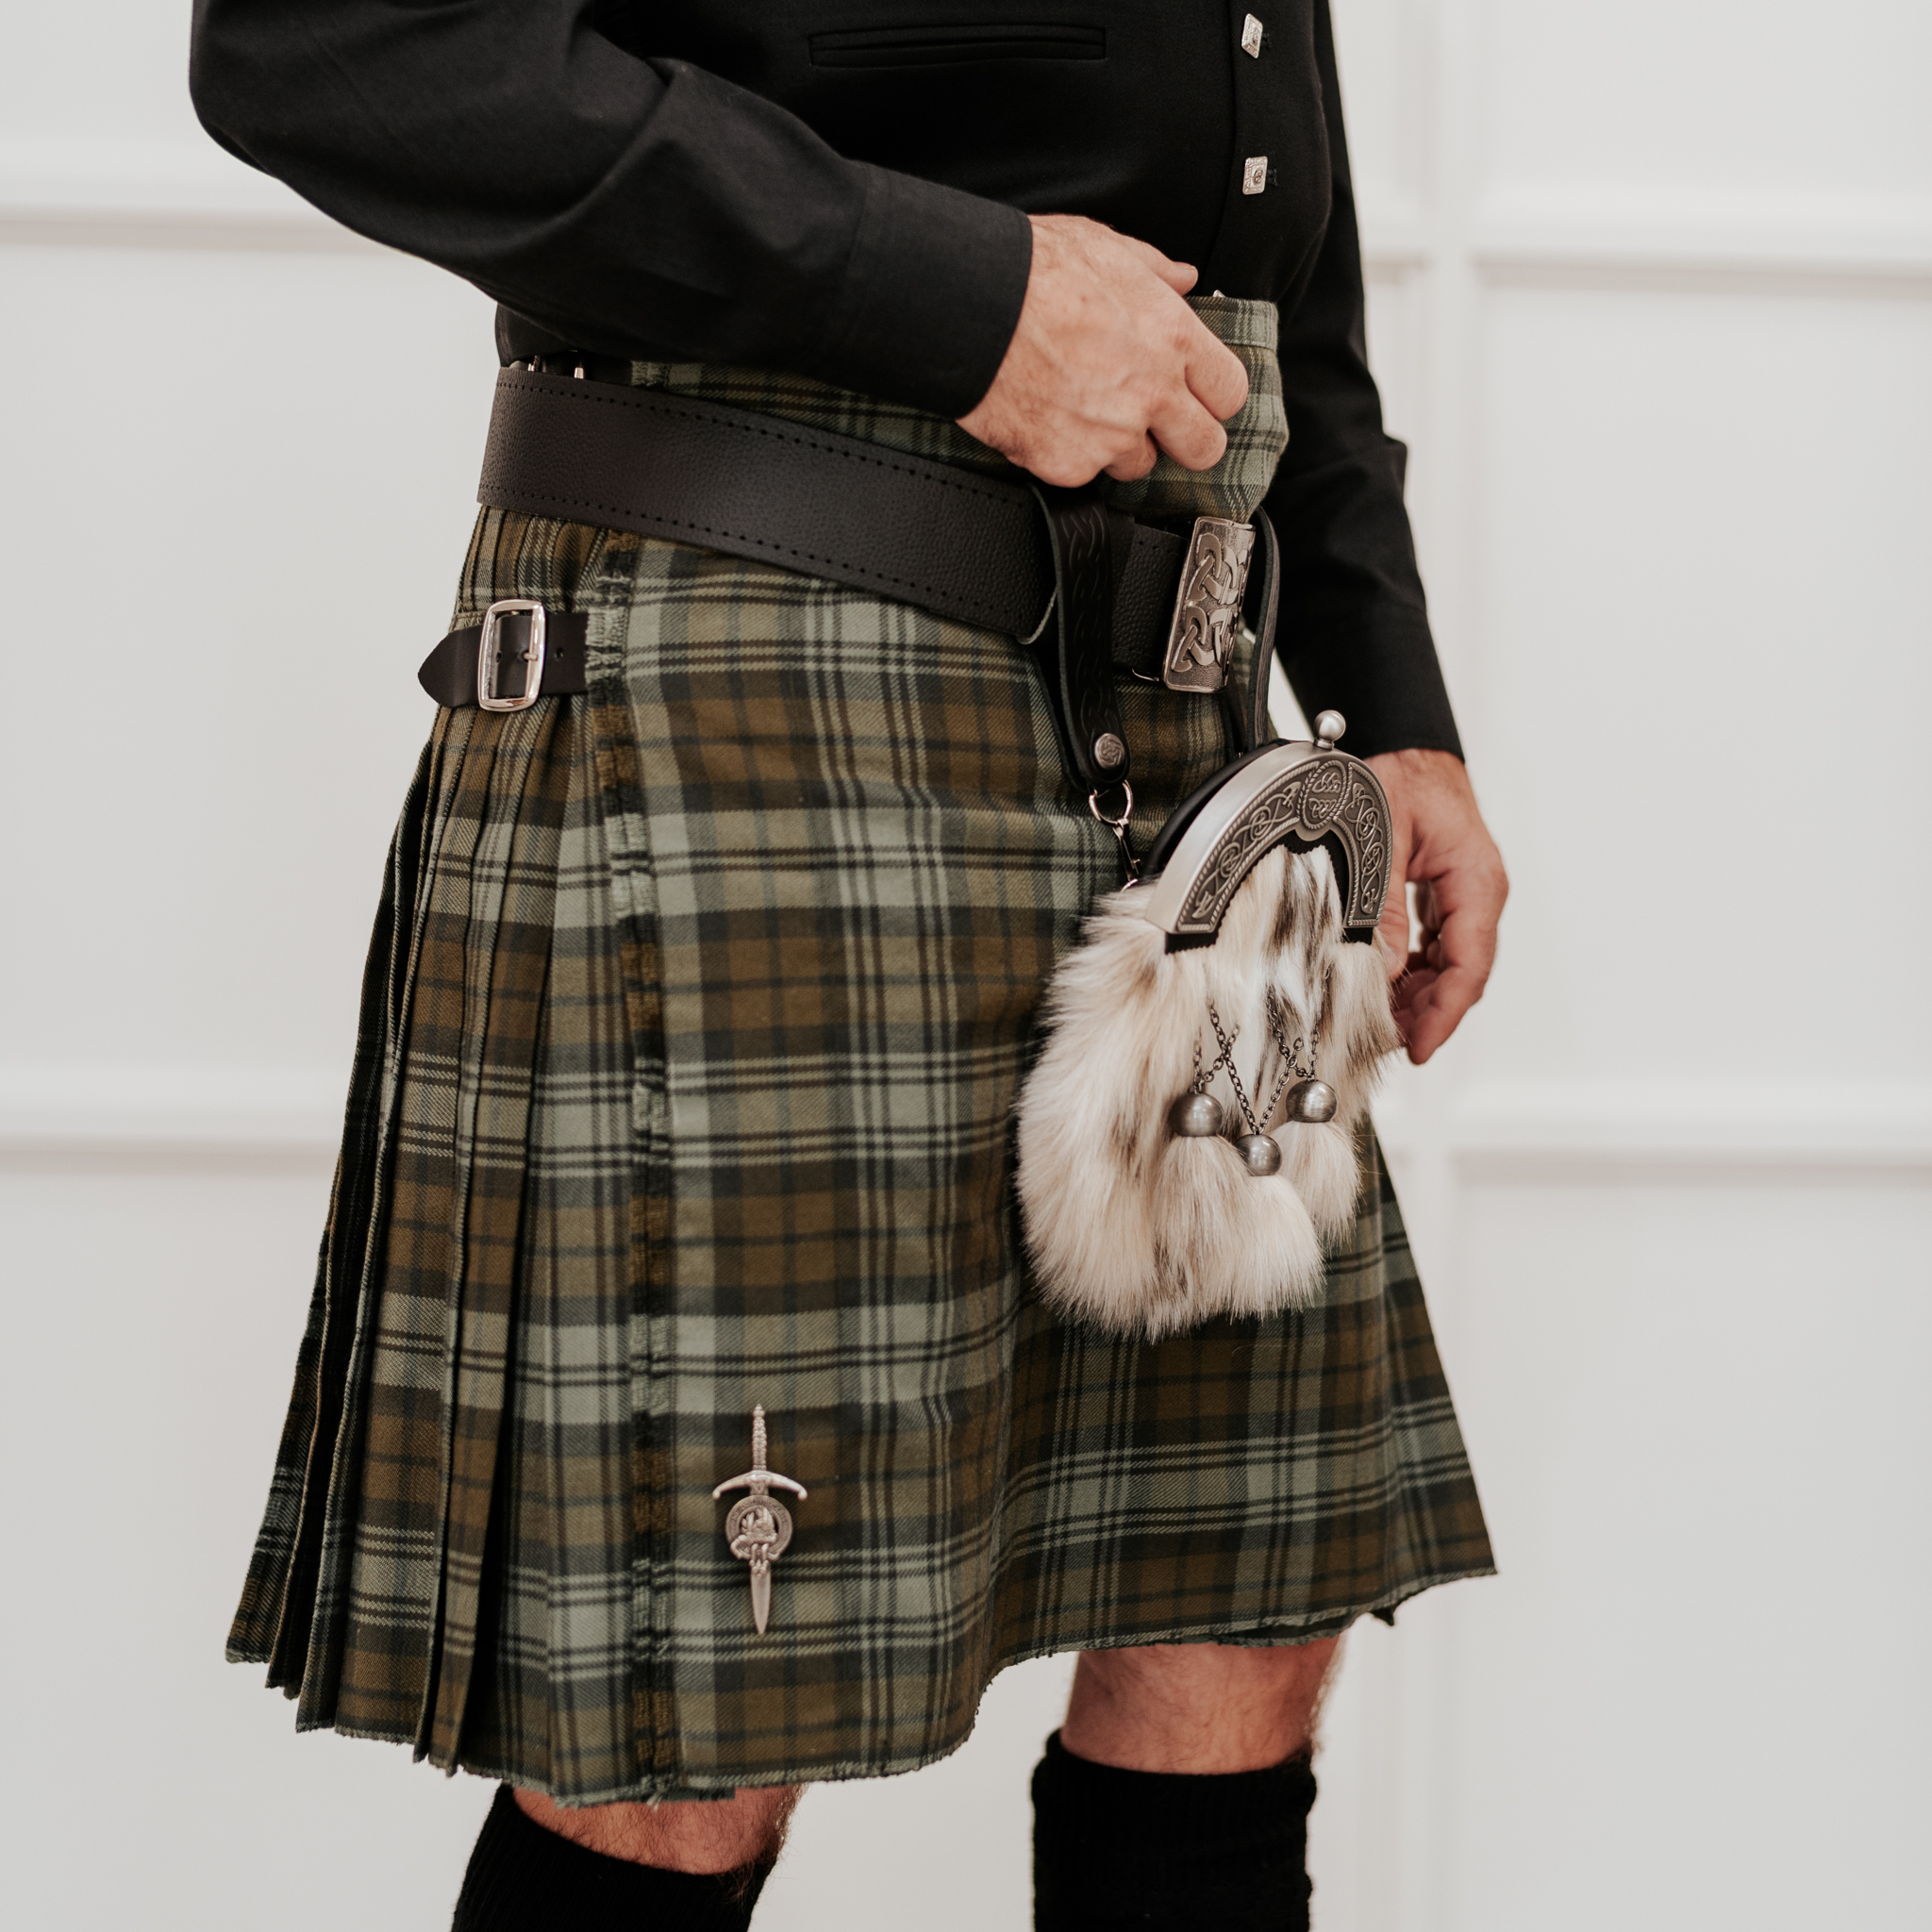 Largest Selection of today kilt - Kilts sale your online Order available for